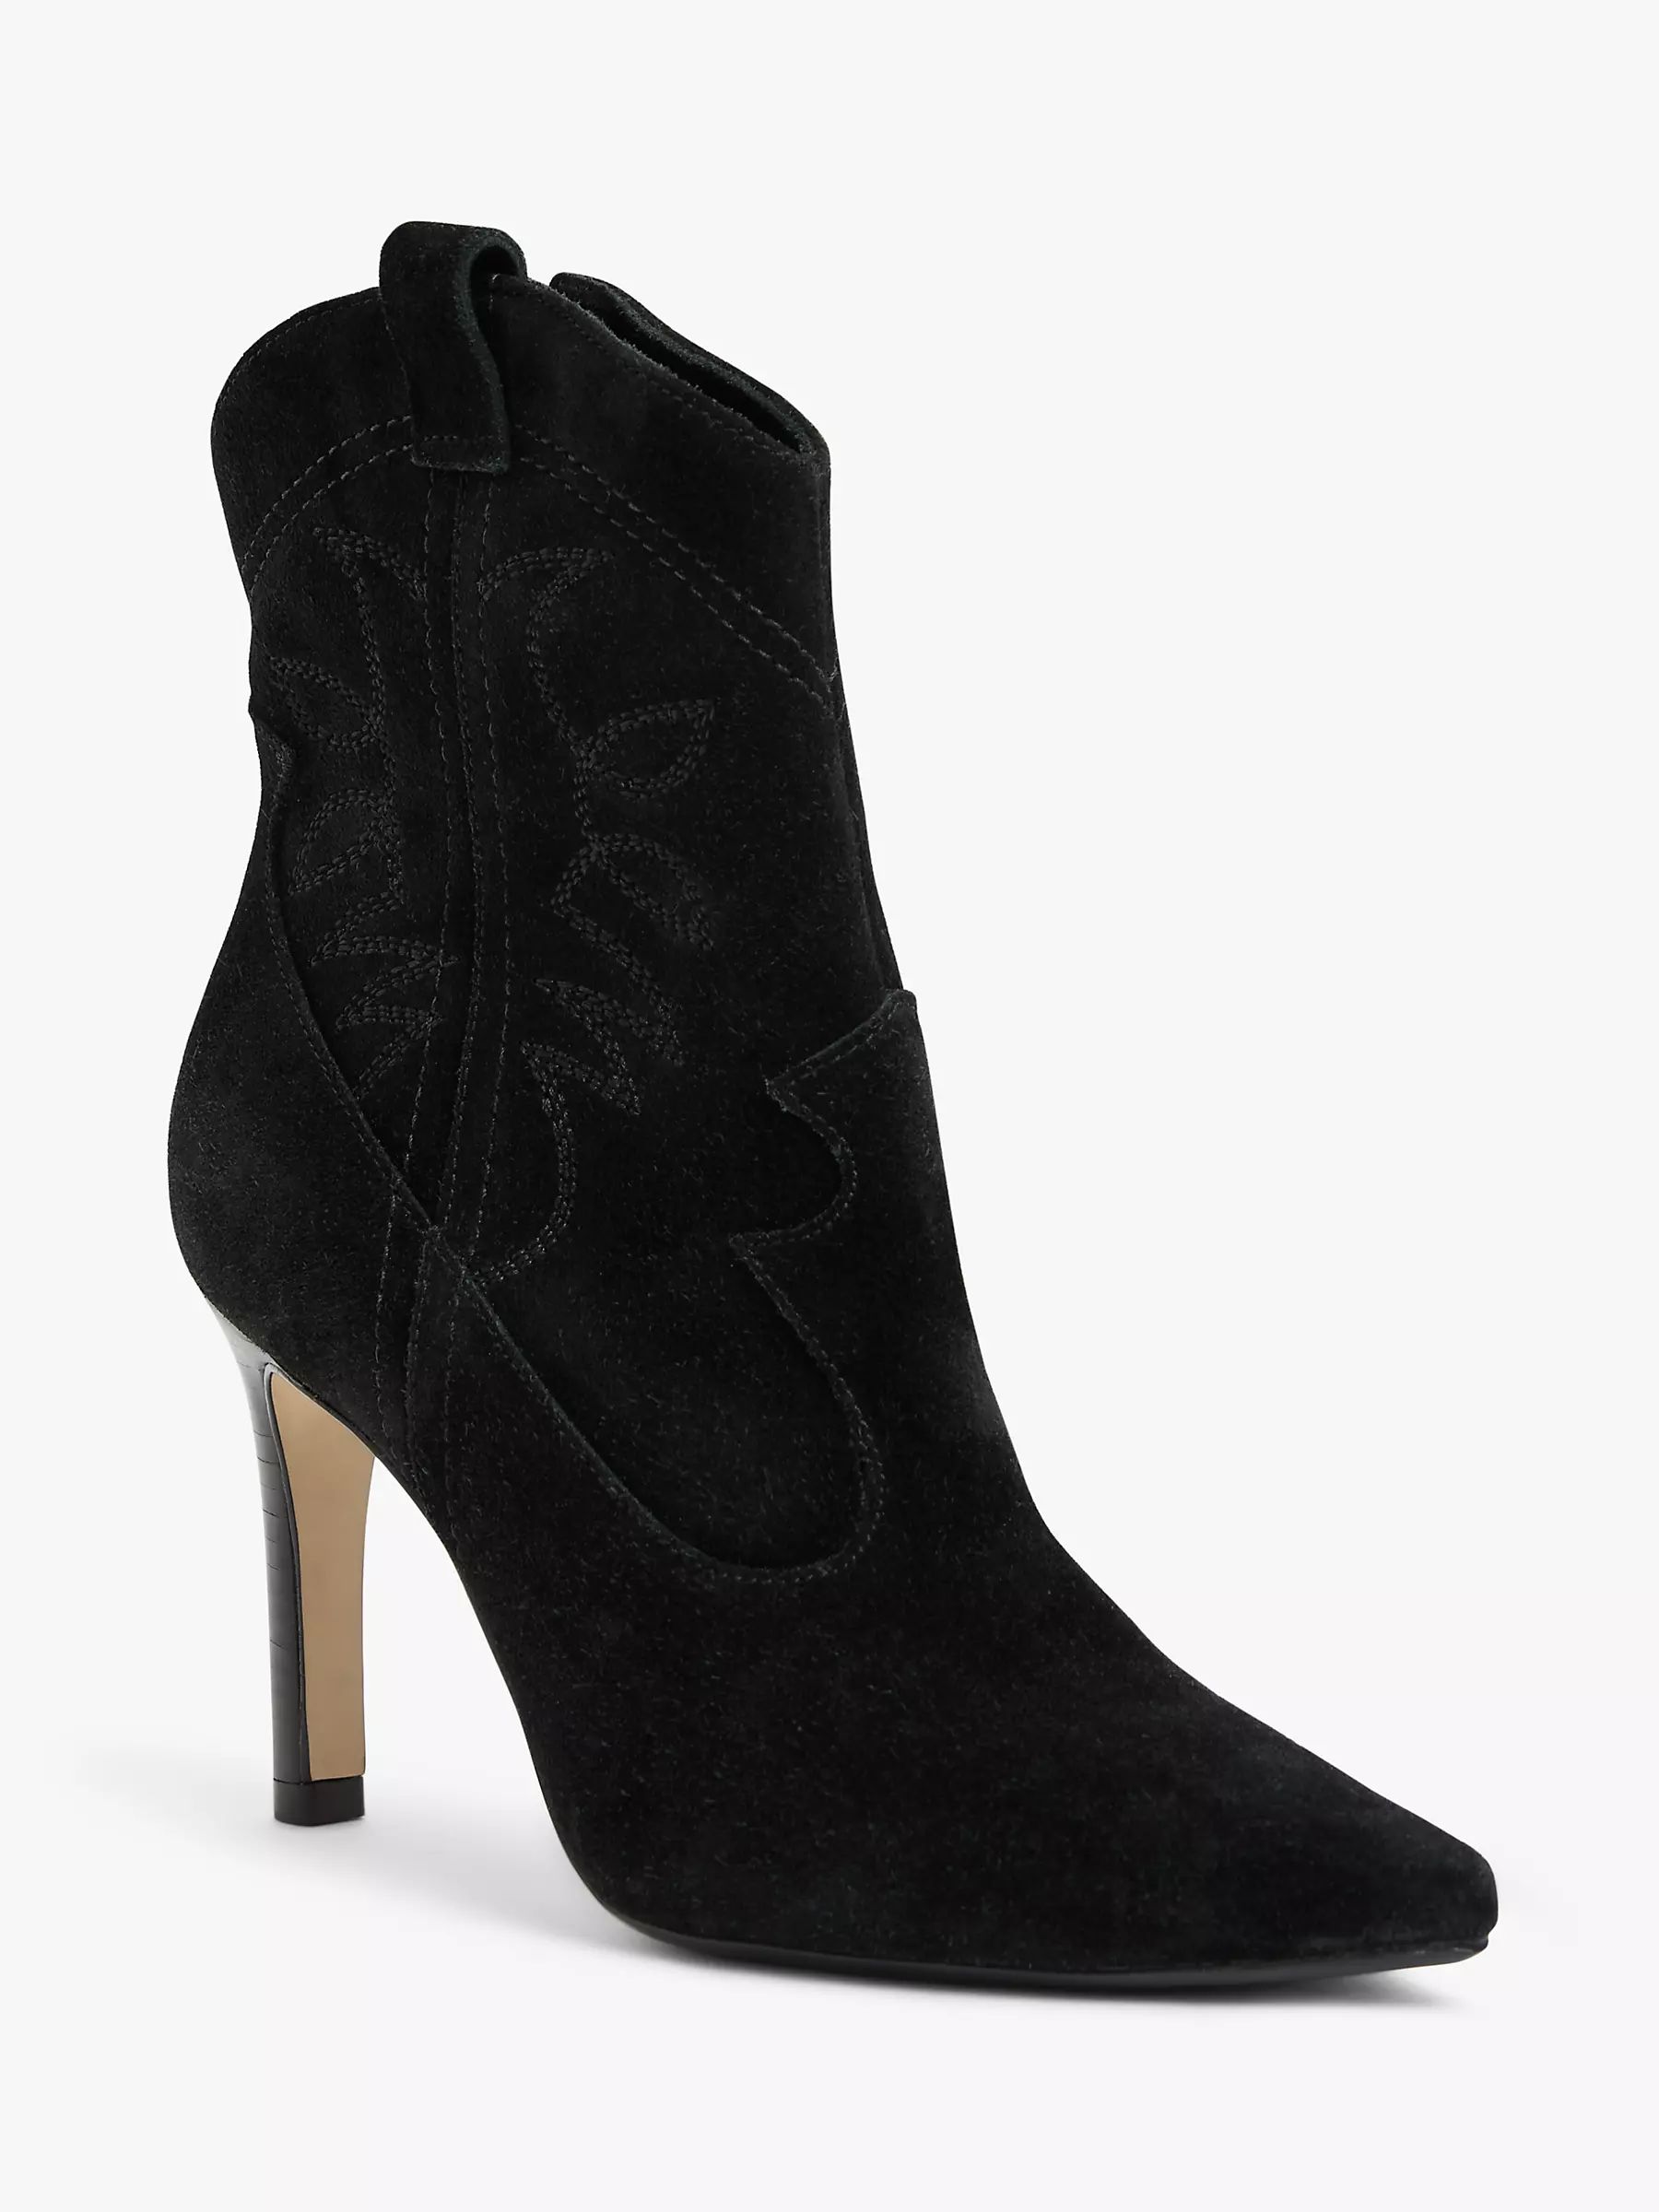 AND/OR Octave Suede Stiletto Heel Ankle Boots, Black | John Lewis (UK)